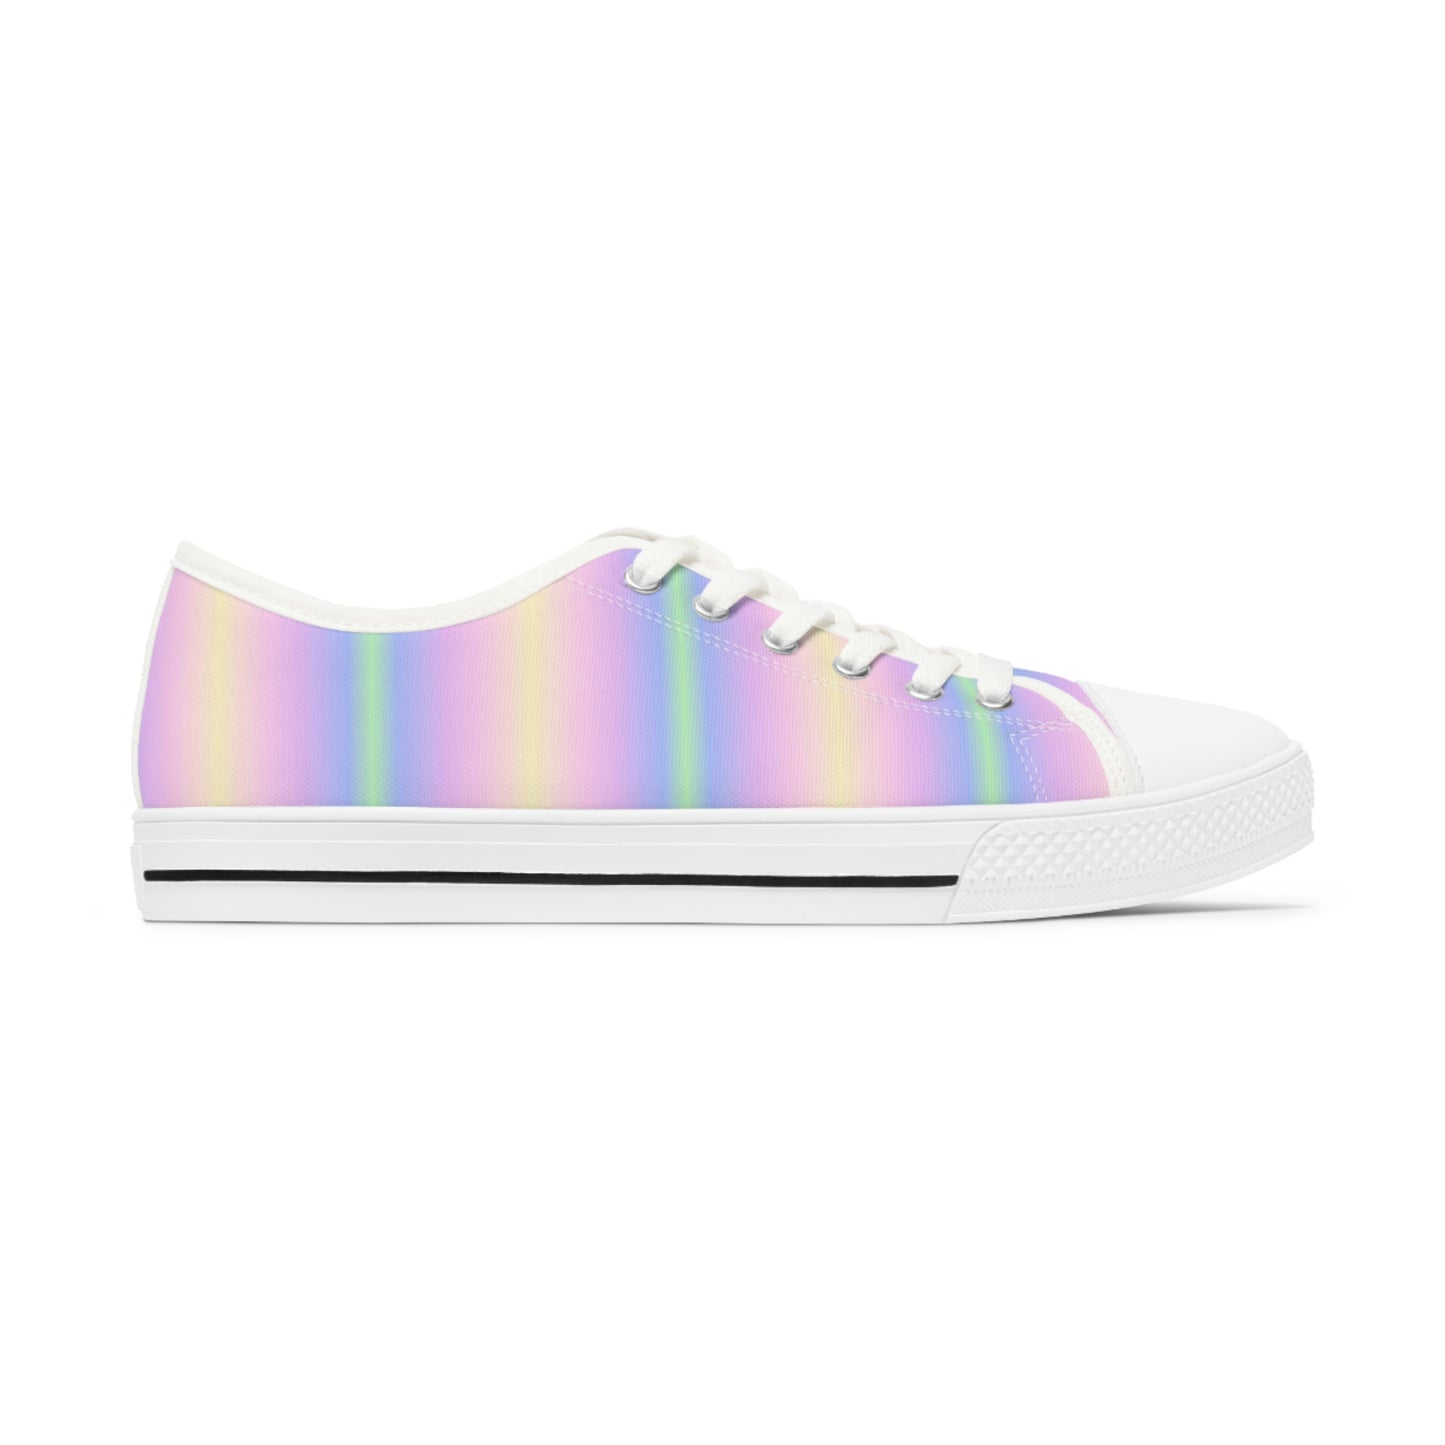 Pastel Rainbow Women Shoes, Tie Dye Ombre Gradient Sneakers Canvas White Low Top Lace Up Girls Aesthetic Flat Shoes